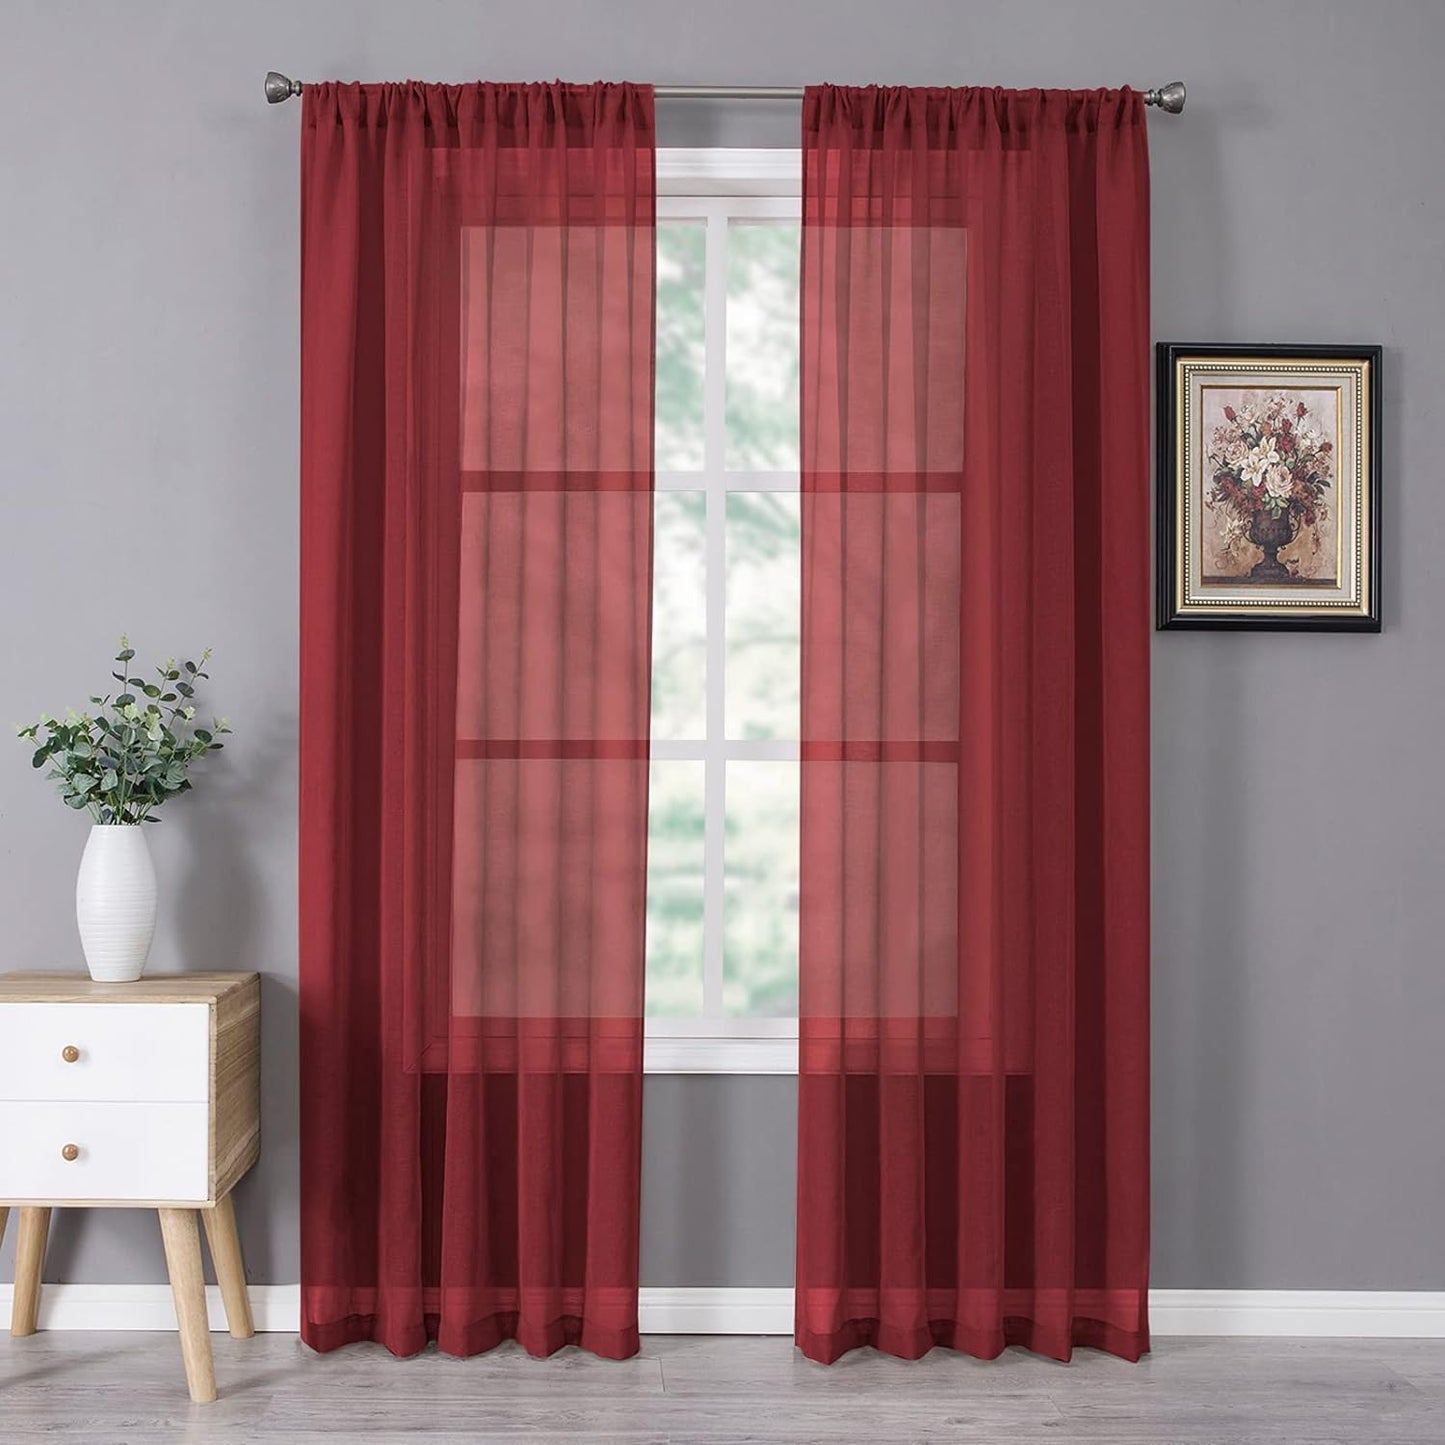 Tollpiz Short Sheer Curtains Linen Textured Bedroom Curtain Sheers Light Filtering Rod Pocket Voile Curtains for Living Room, 54 X 45 Inches Long, White, Set of 2 Panels  Tollpiz Tex Burgundy Red 54"W X 72"L 